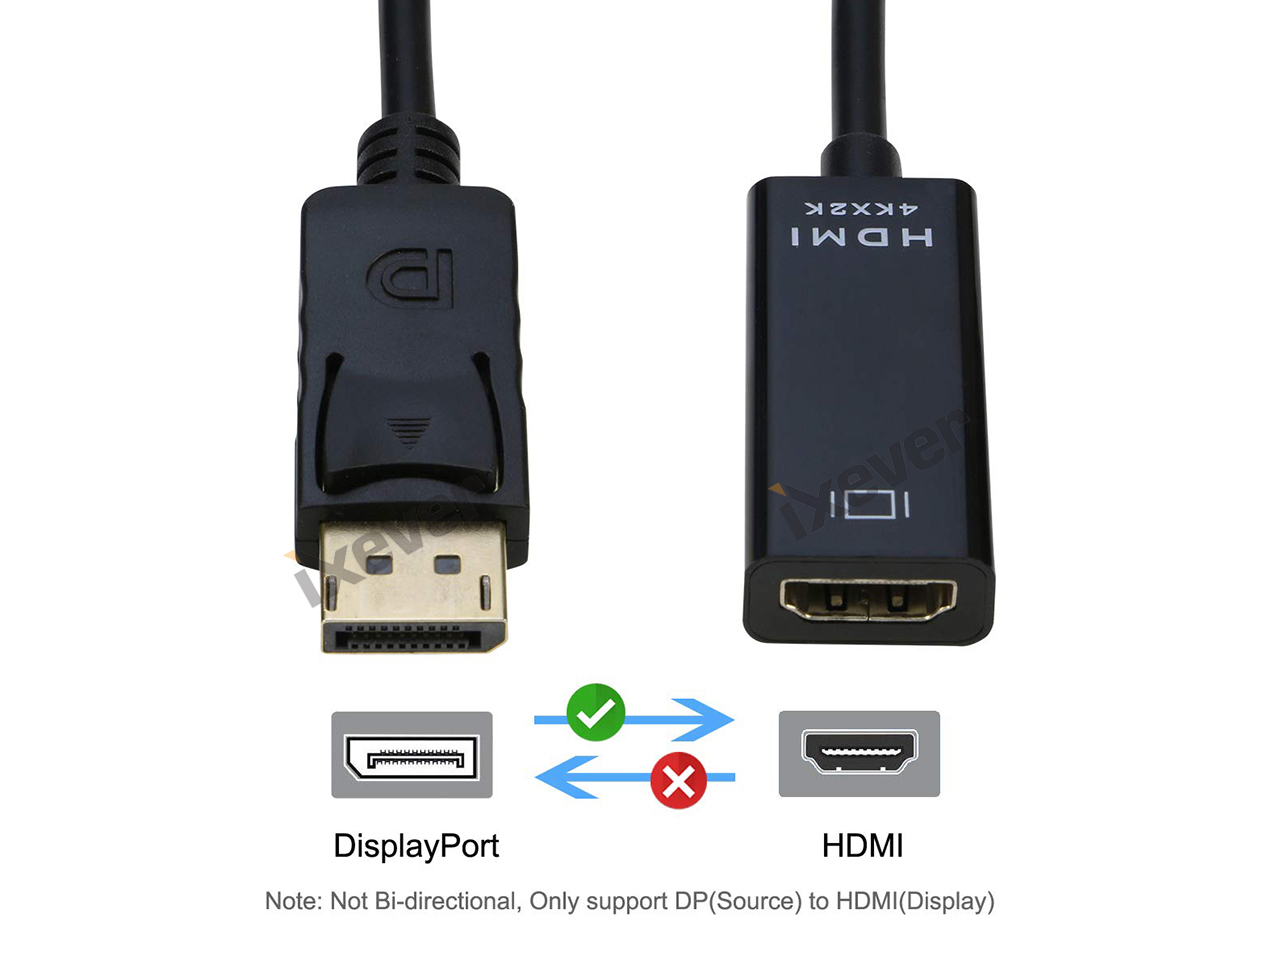 DisplayPort DP HDMI Cable Adapter Display Port Converter for Projector HP/Dell/Apple Samsung PC la Display Port to HDMI,Antkeet Display Port to HDMI Adapter 1080 4K2K Gold Plated Male to Female 